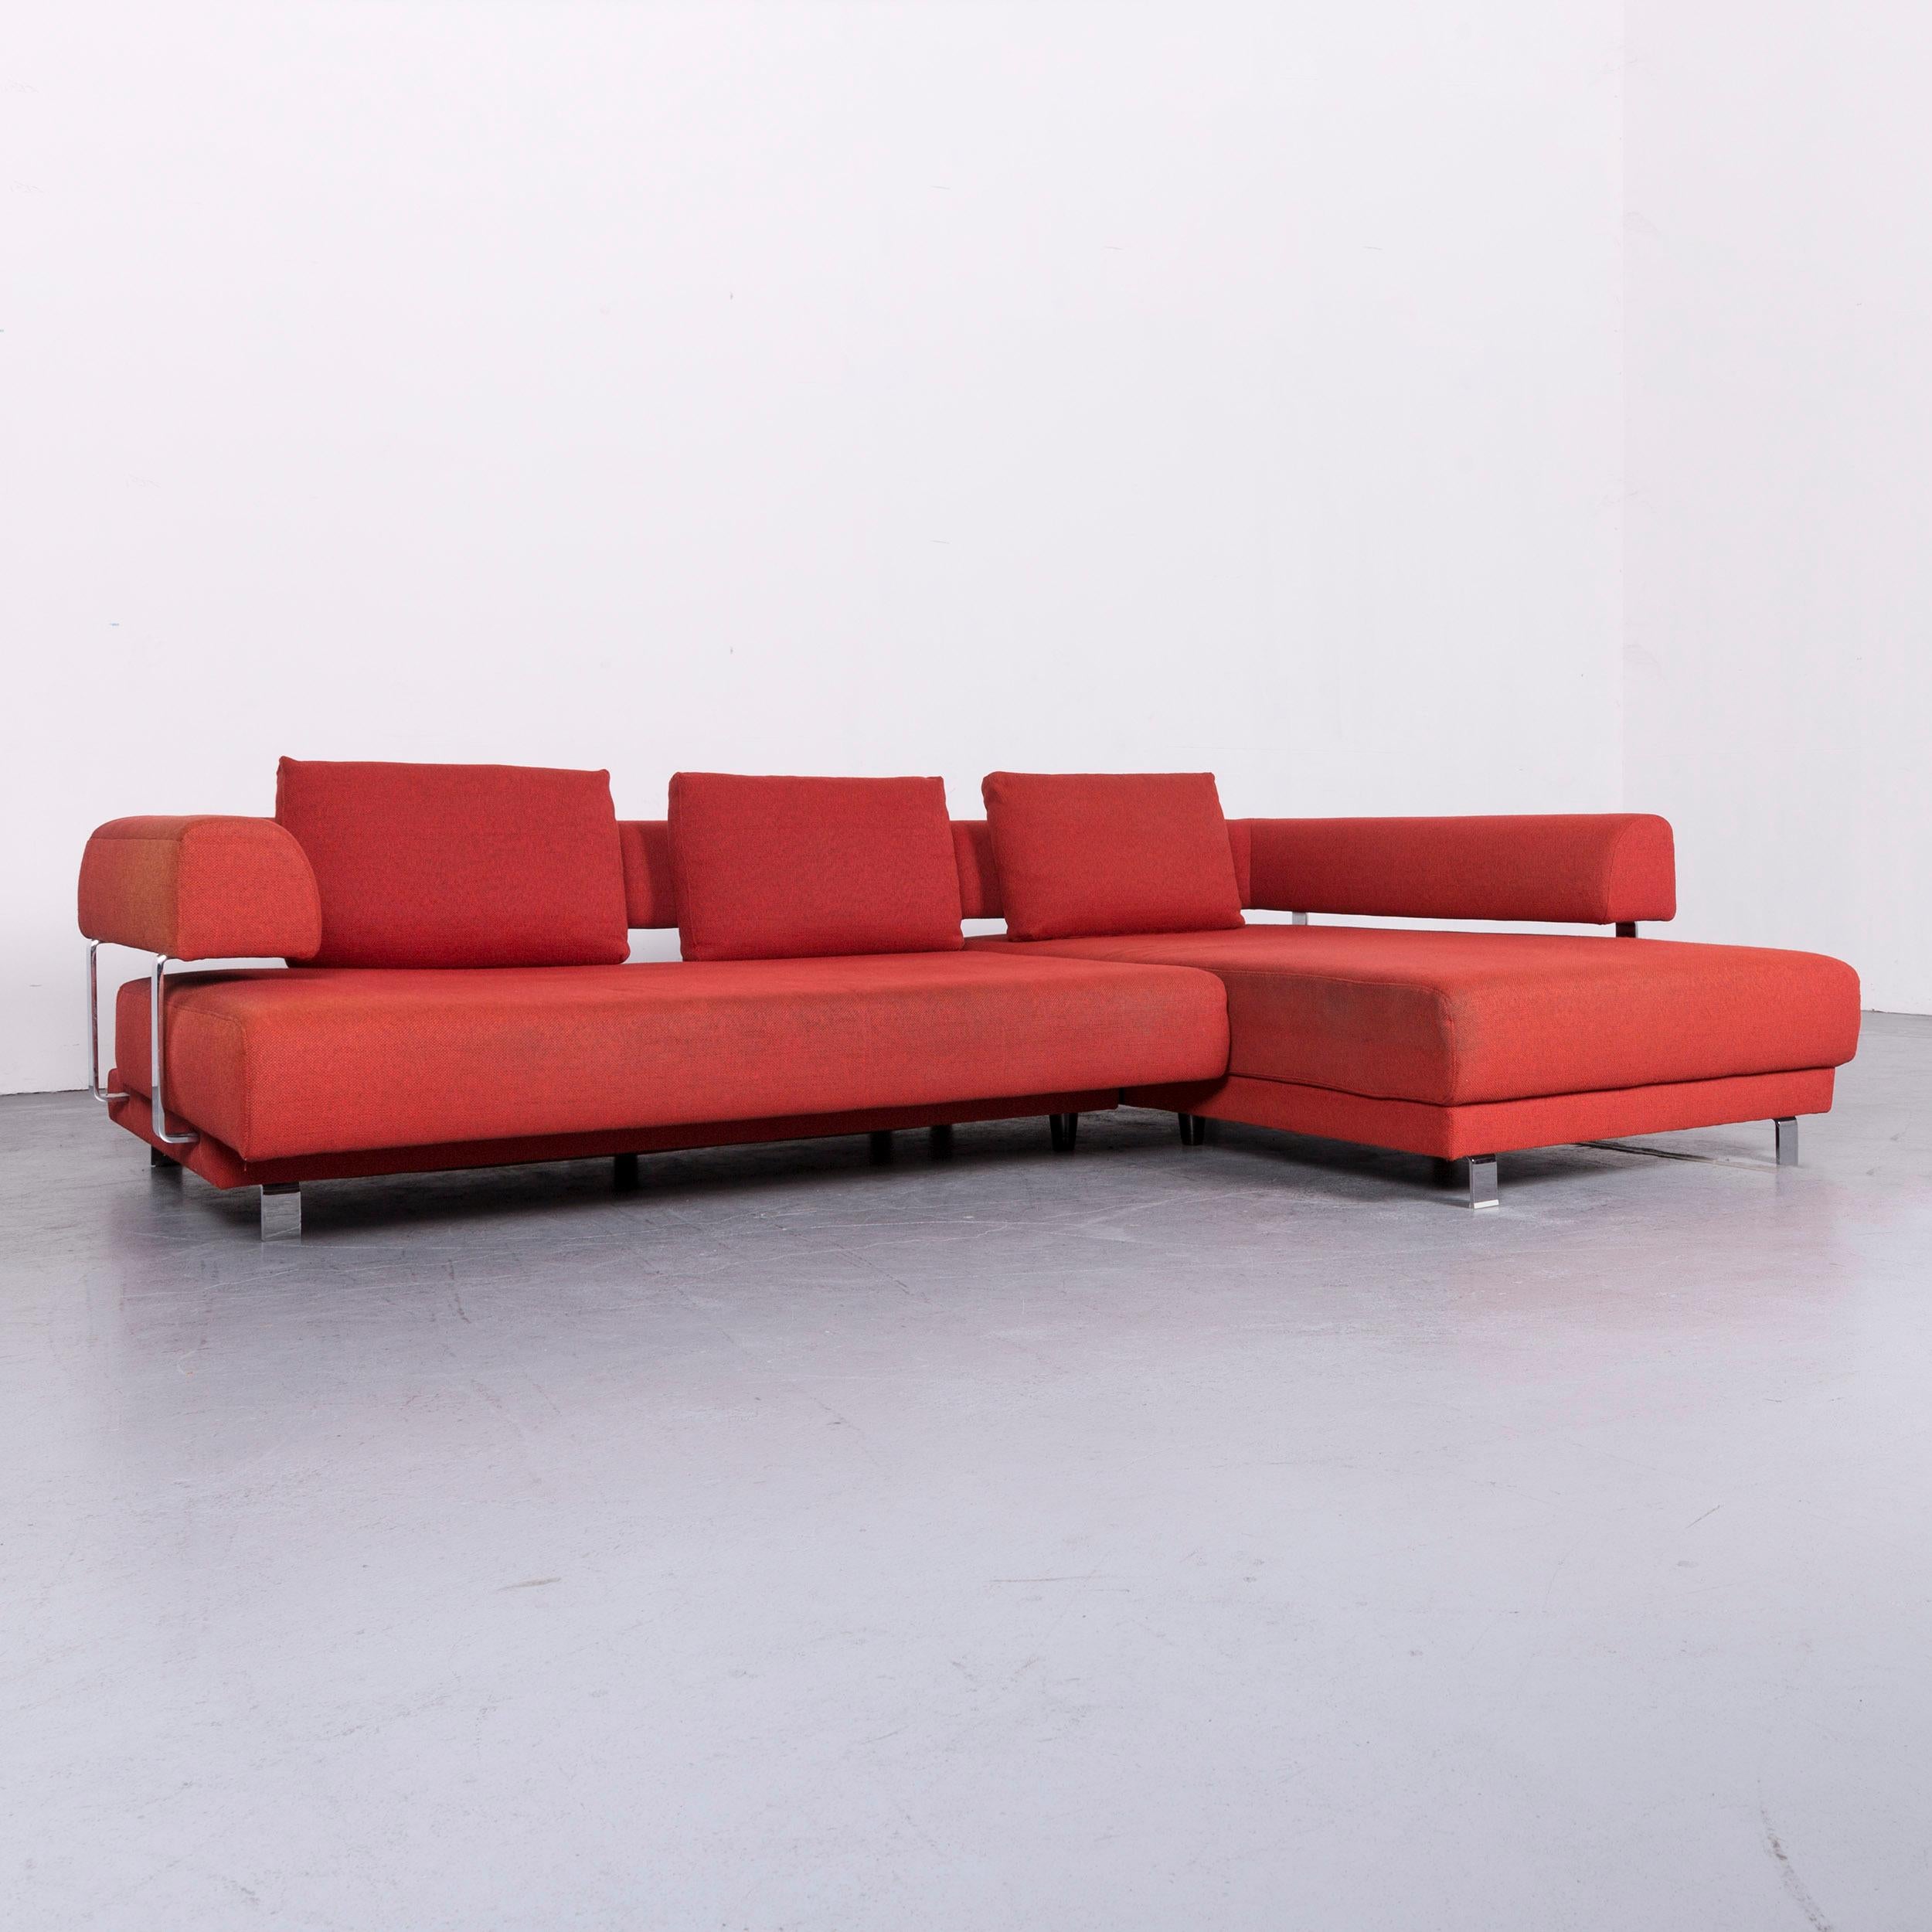 We bring to you an Ewald Schillig brand face designer sofa fabric red corner couch.